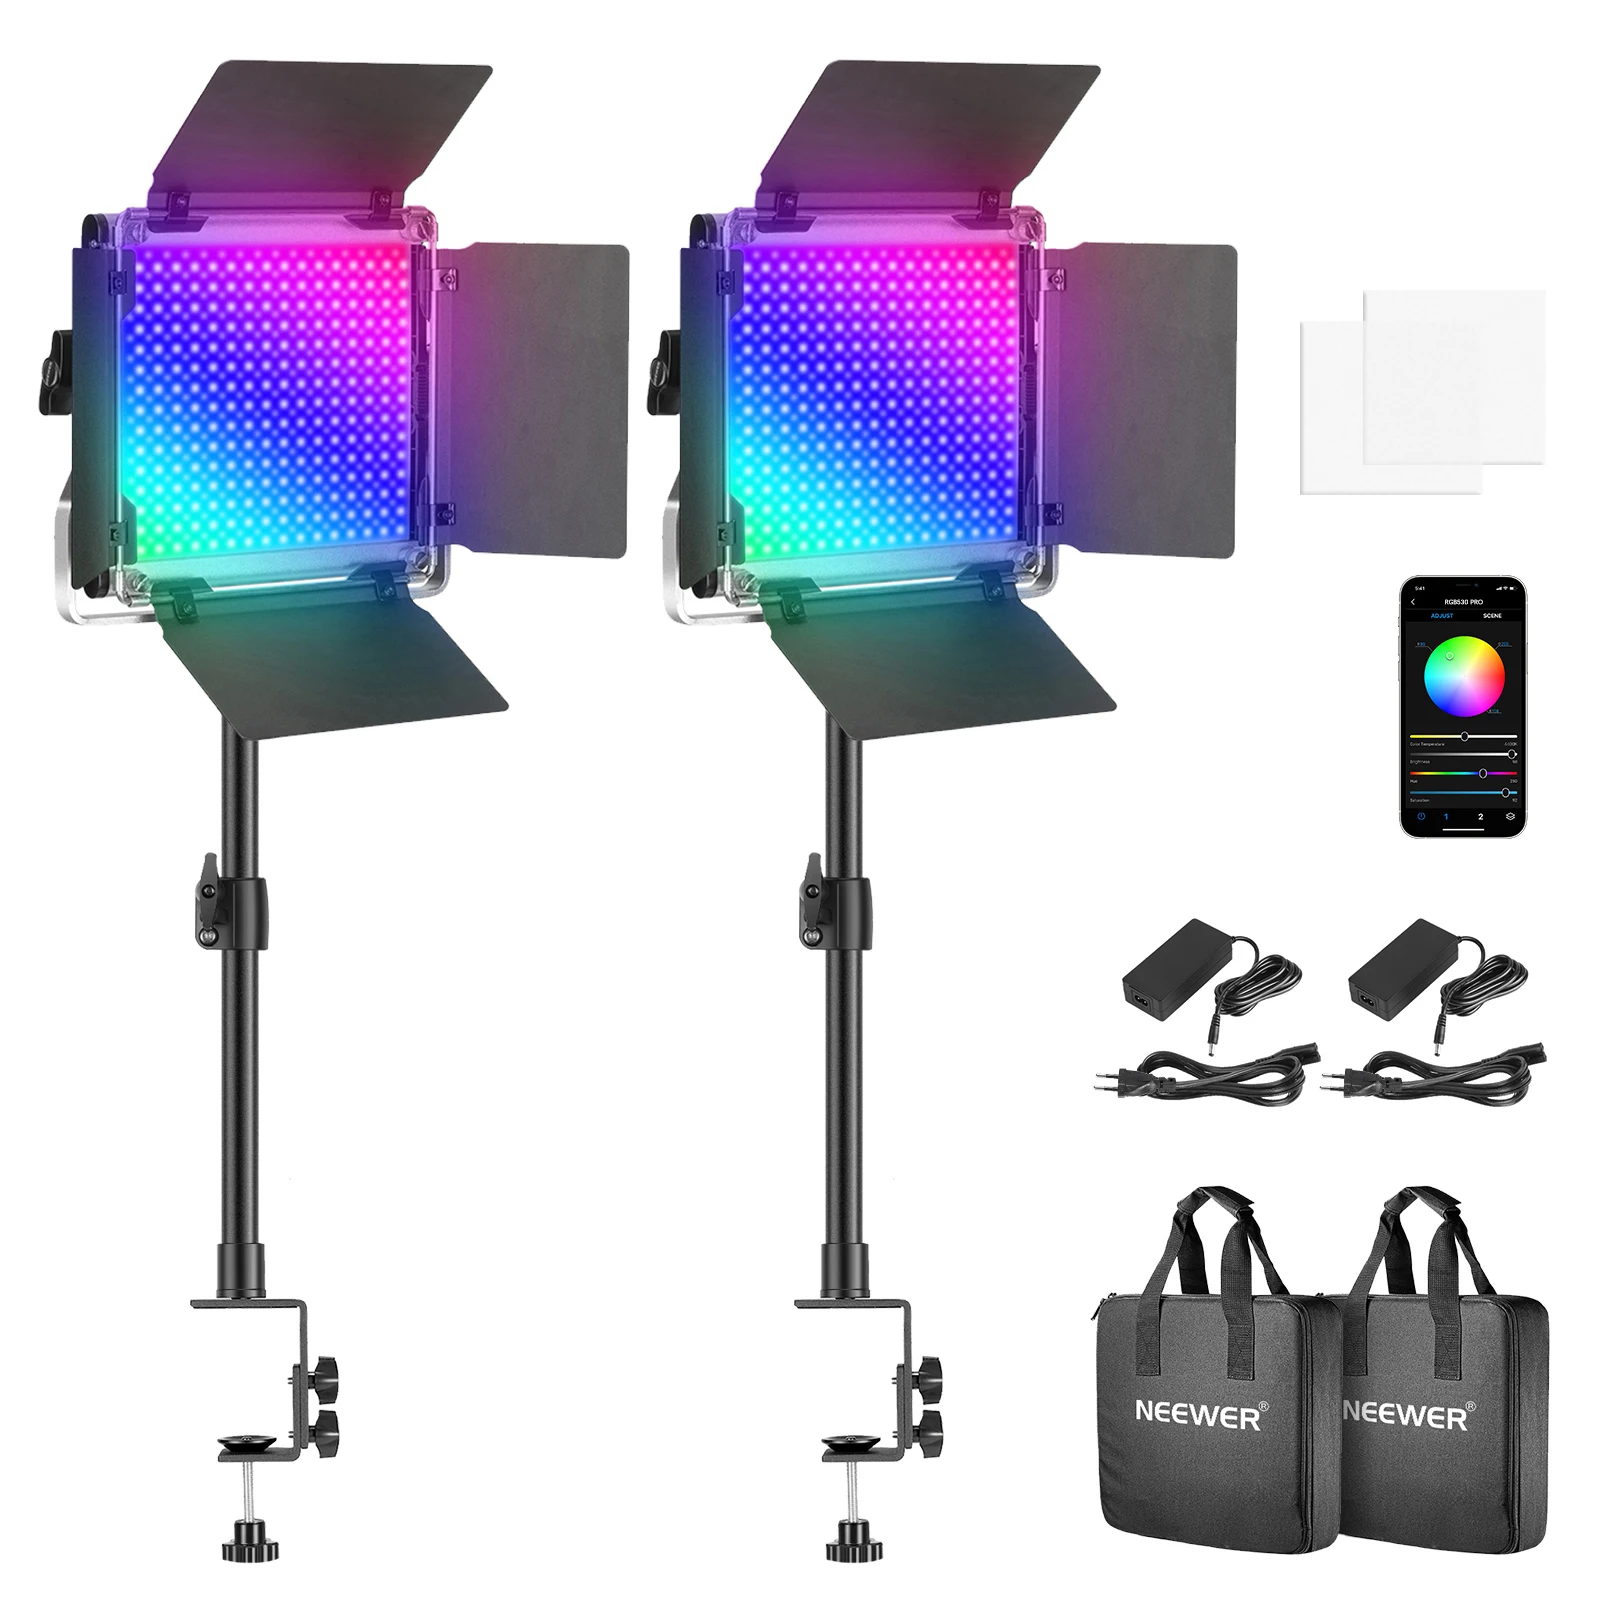 

Neewer 2-Pack 530 PRO RGB Led Video Light with APP Control, CRI 97+ for Streaming, Zoom, YouTube, Video Conference, Photography